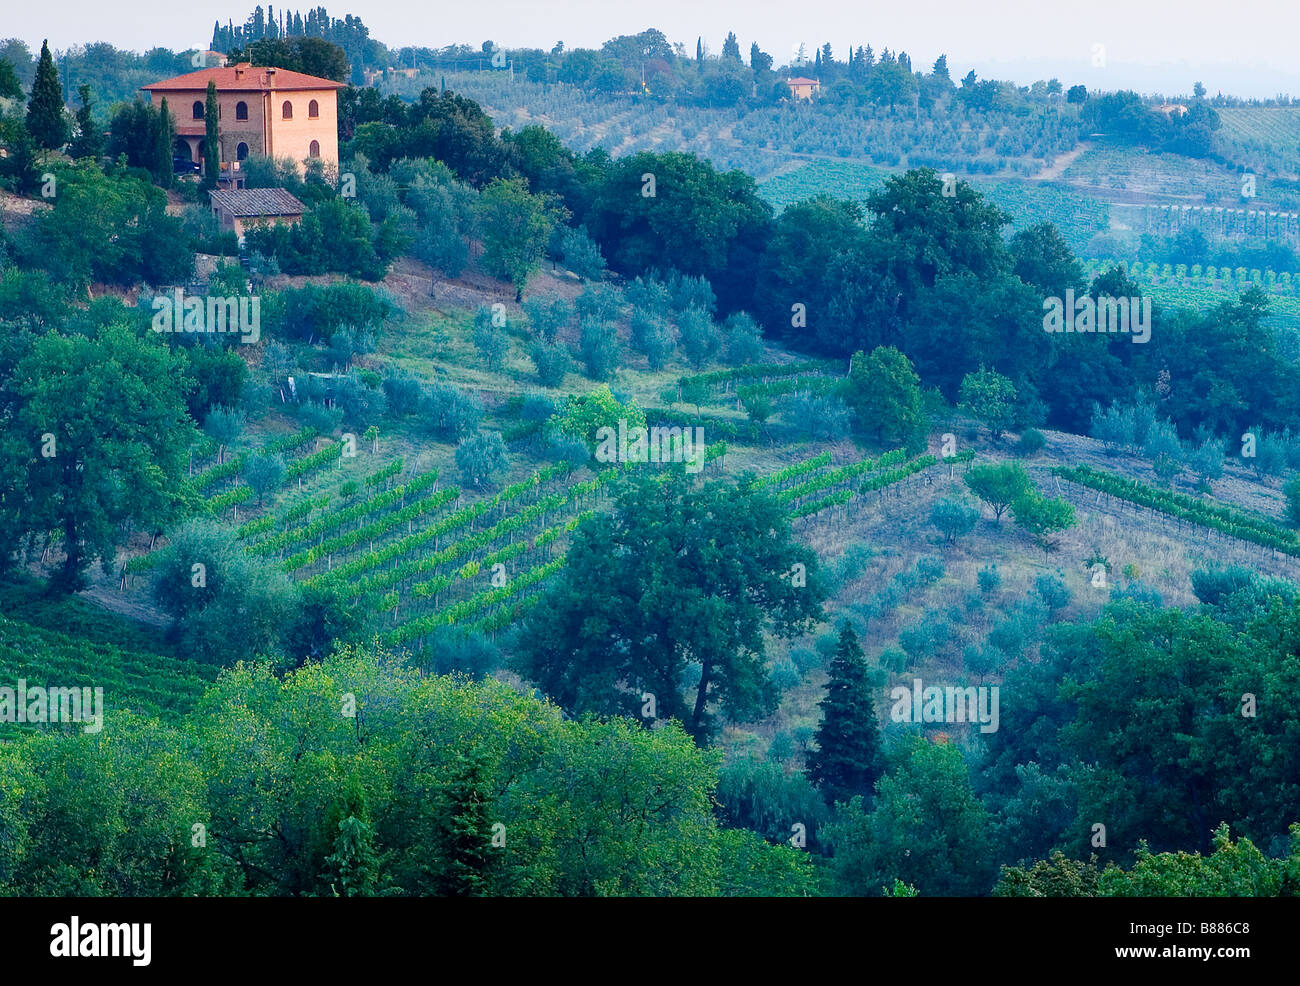 A serene view of a tuscan villa and vineyards in Tuscany Italy Stock Photo